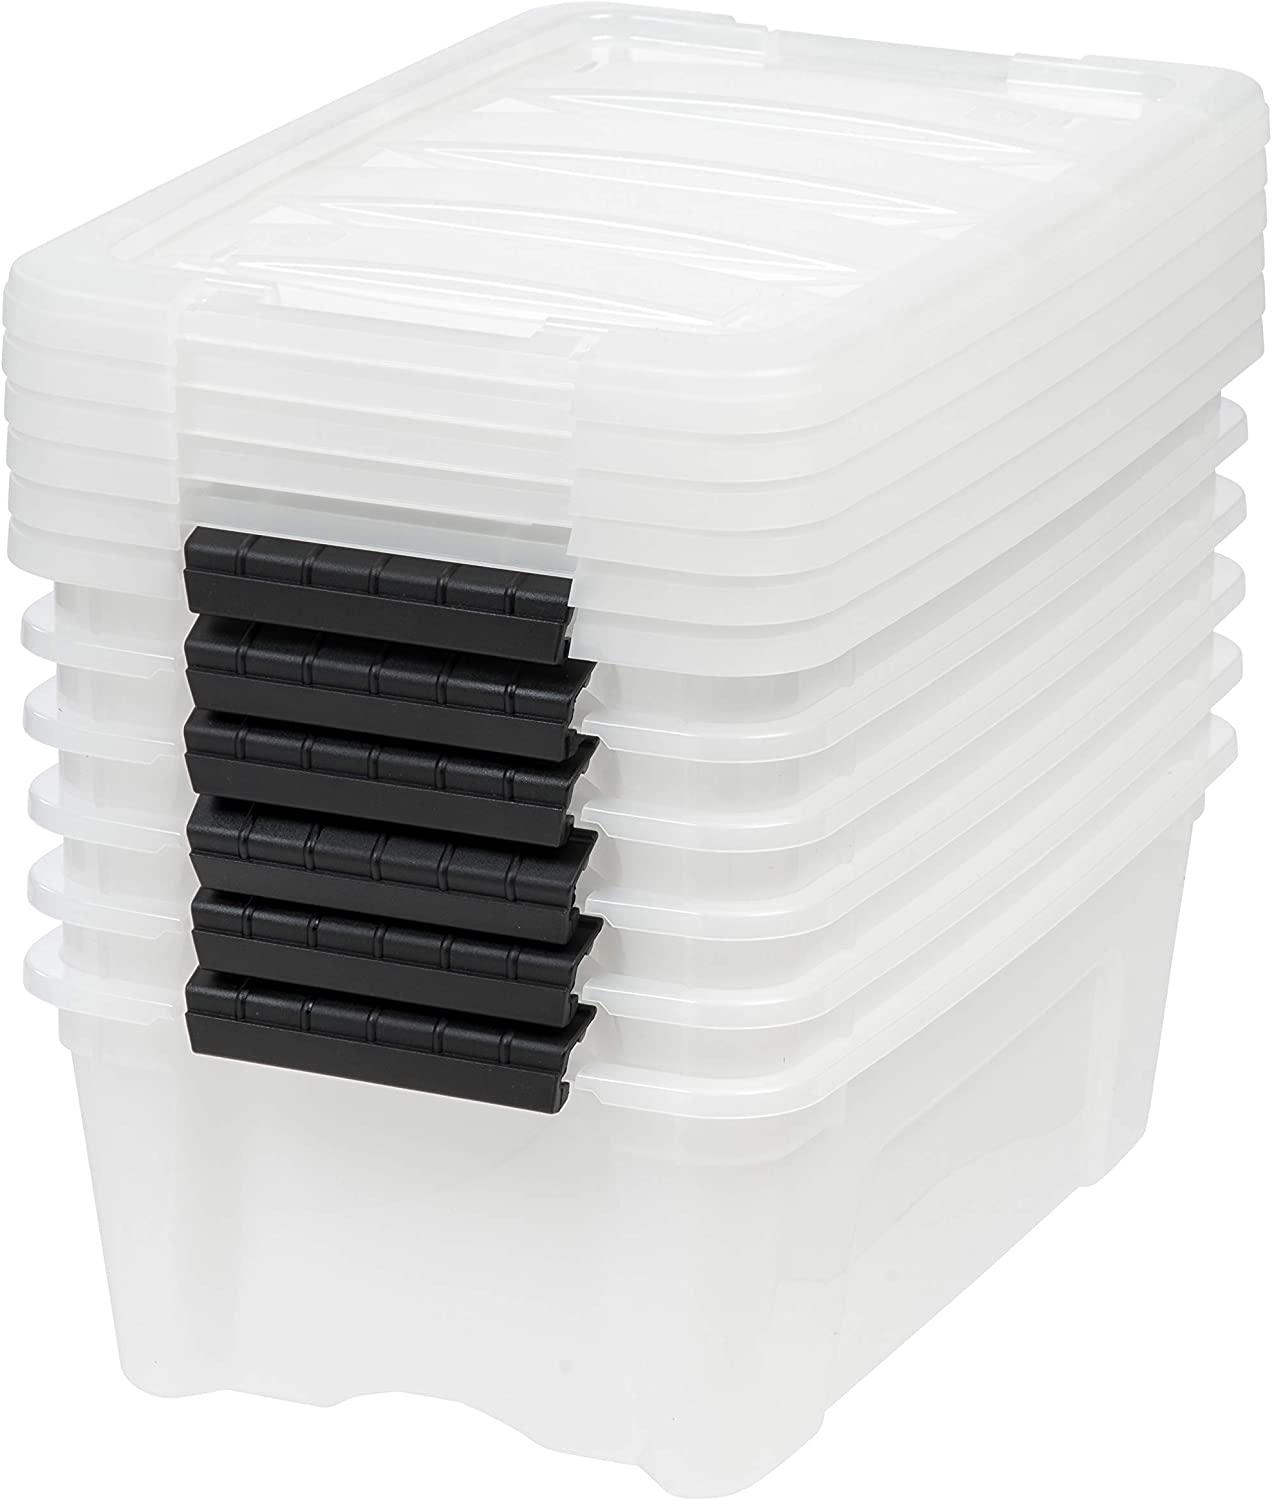 https://bigbigmart.com/wp-content/uploads/2023/06/IRIS-USA-12-Qt.-Plastic-Storage-Container-Bin-with-Secure-Lid-and-Latching-Buckles-6-pack-Pearl-Durable-Stackable-Nestable-Organizing-Tote-Tub-Box-Toy-General-Organization-Small8.jpg